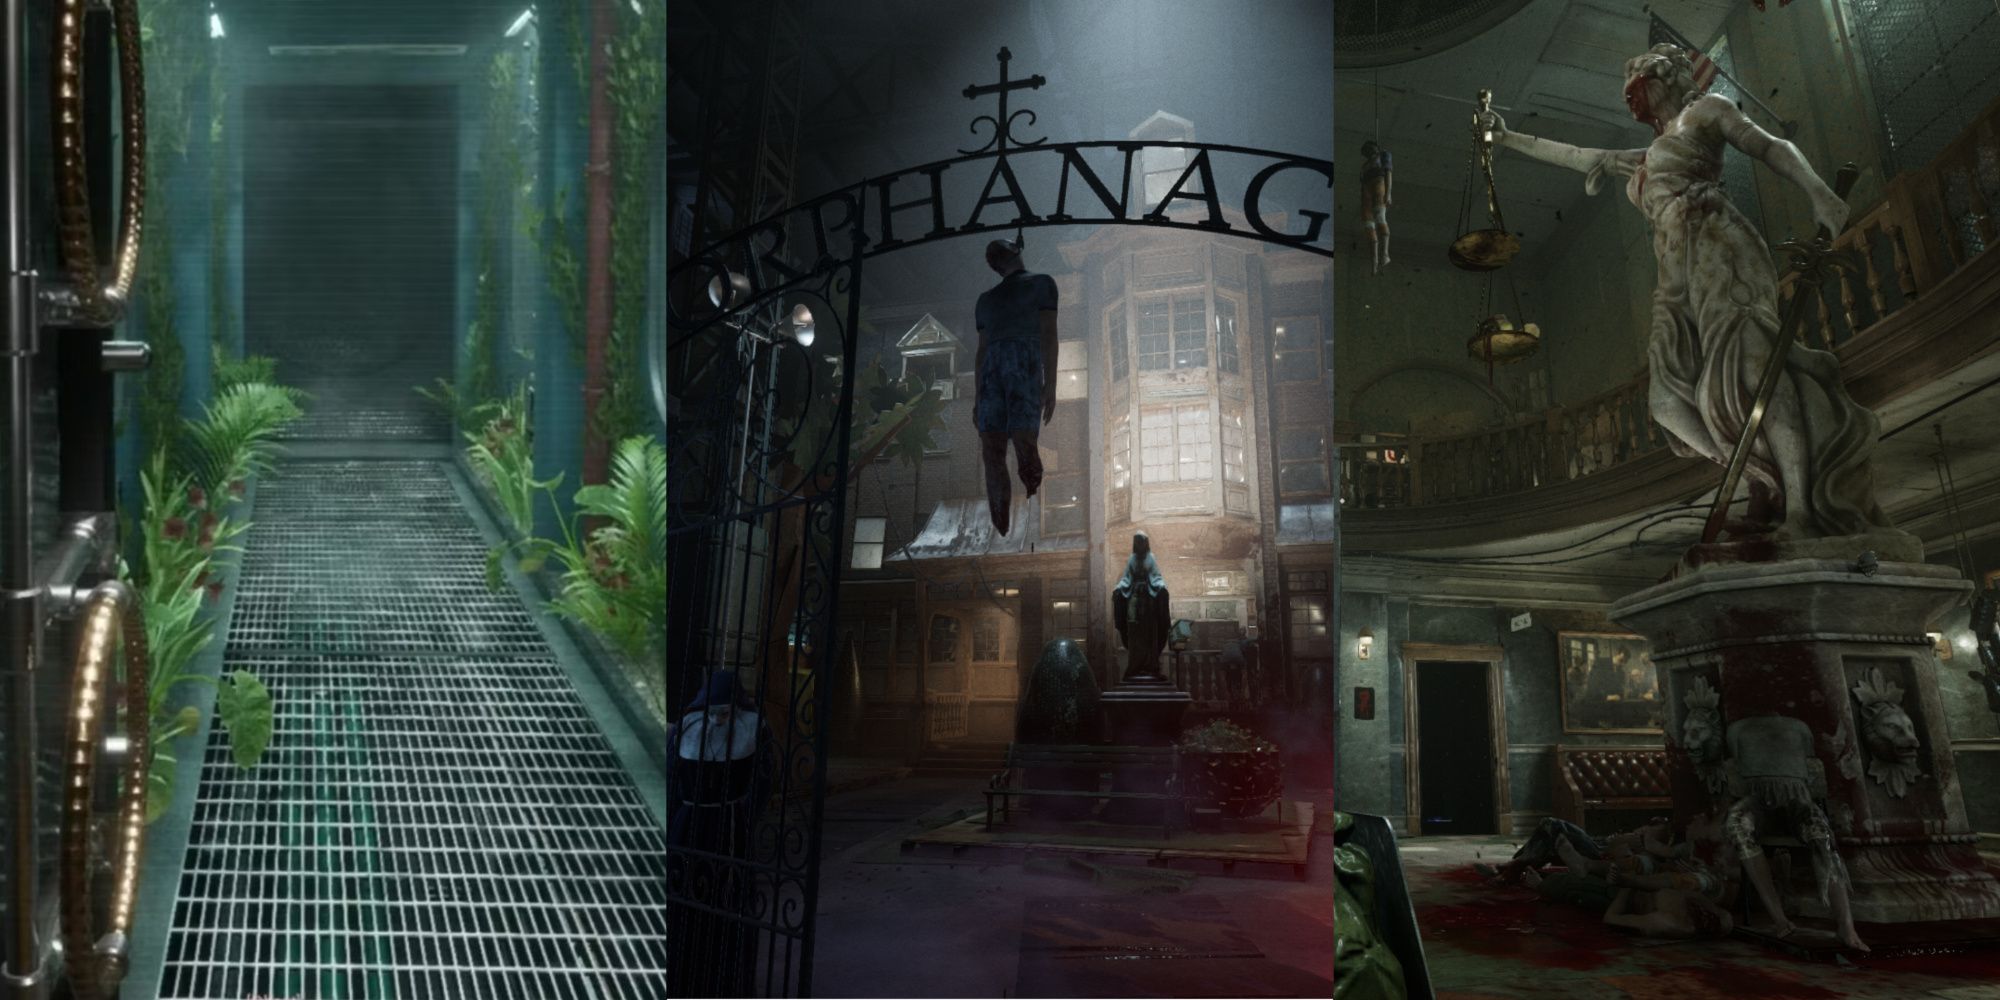 Reborn Entrance, Orphanage Entrance, and Courtroom in The Outlast Trials